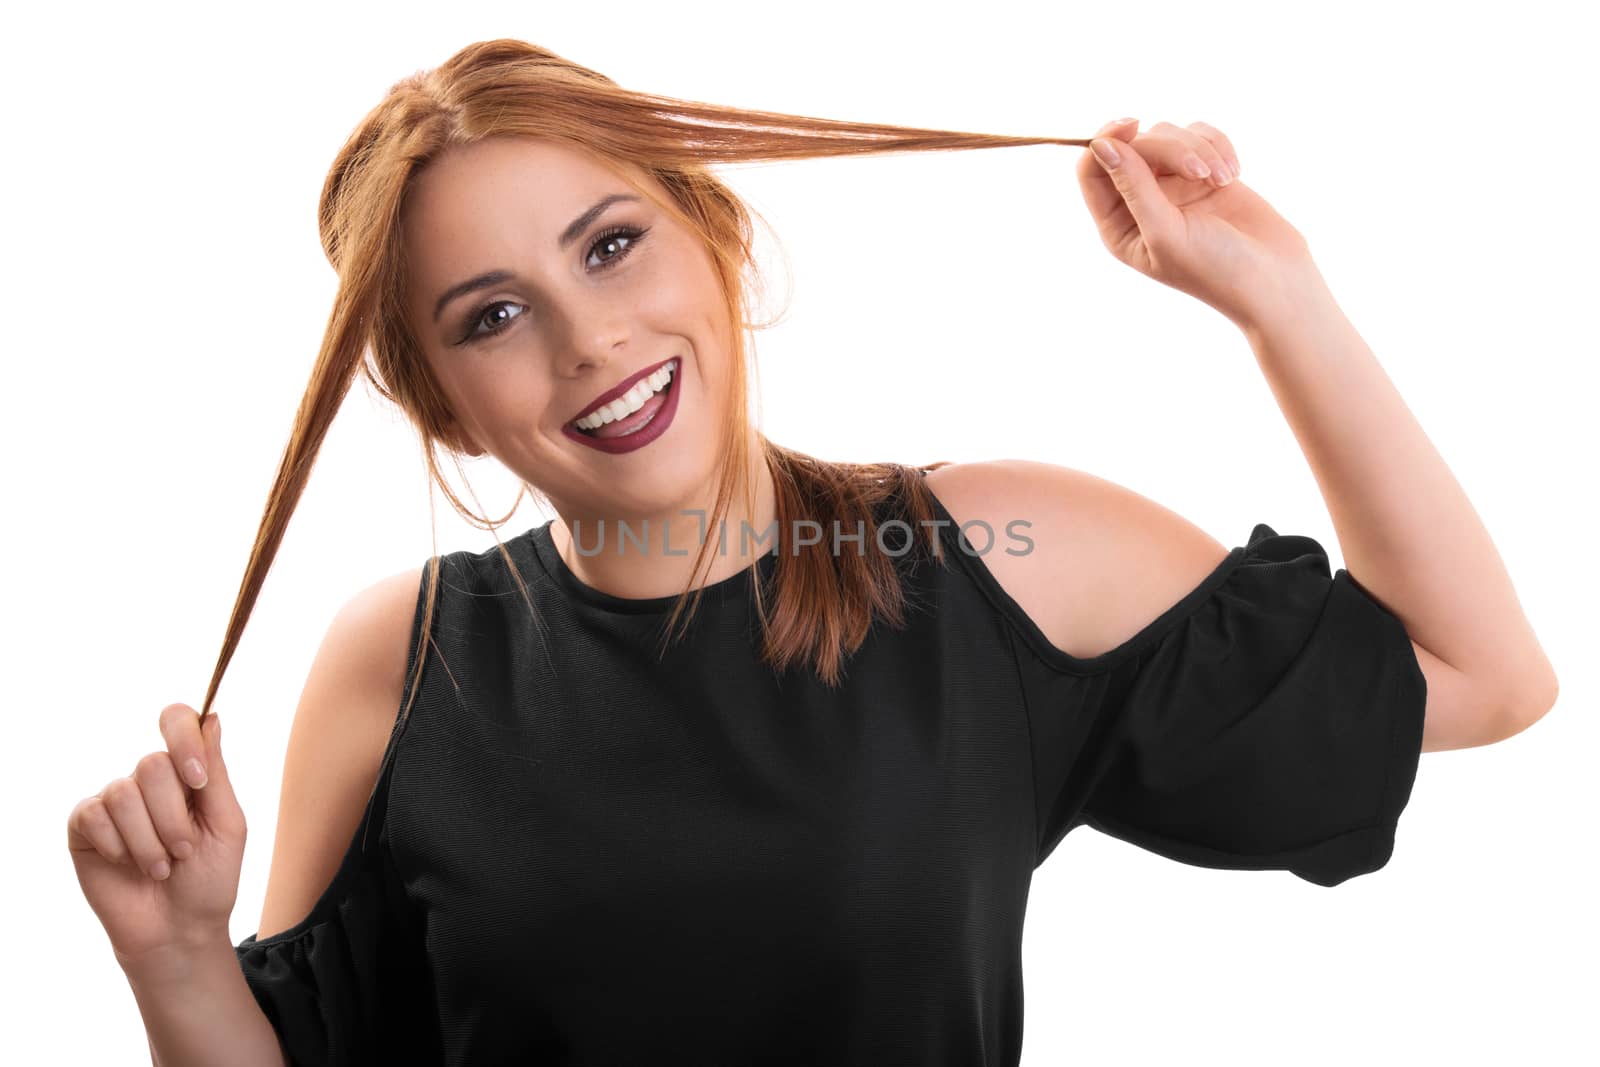 A portrait of a beautiful smiling young girl playing with her hair, isolated on white background.